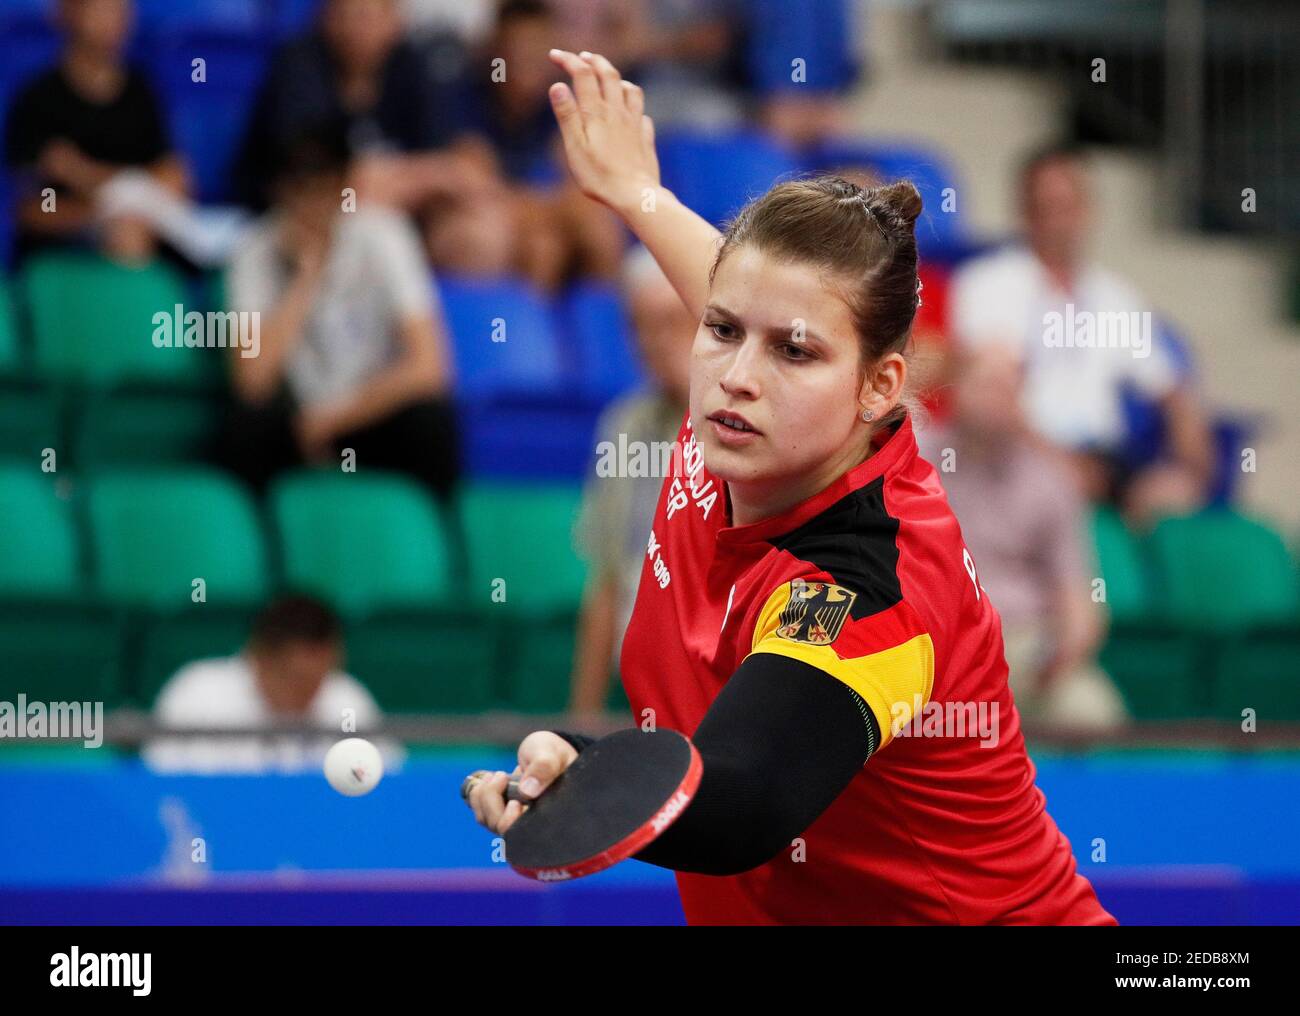 2019 European Games - Table Tennis - Mixed Doubles - Tennis Olympic Centre,  Minsk, Belarus - June 25, 2019. Germany's Petrissa Solja in action with  Germany's Patrick Franziska during the gold medal